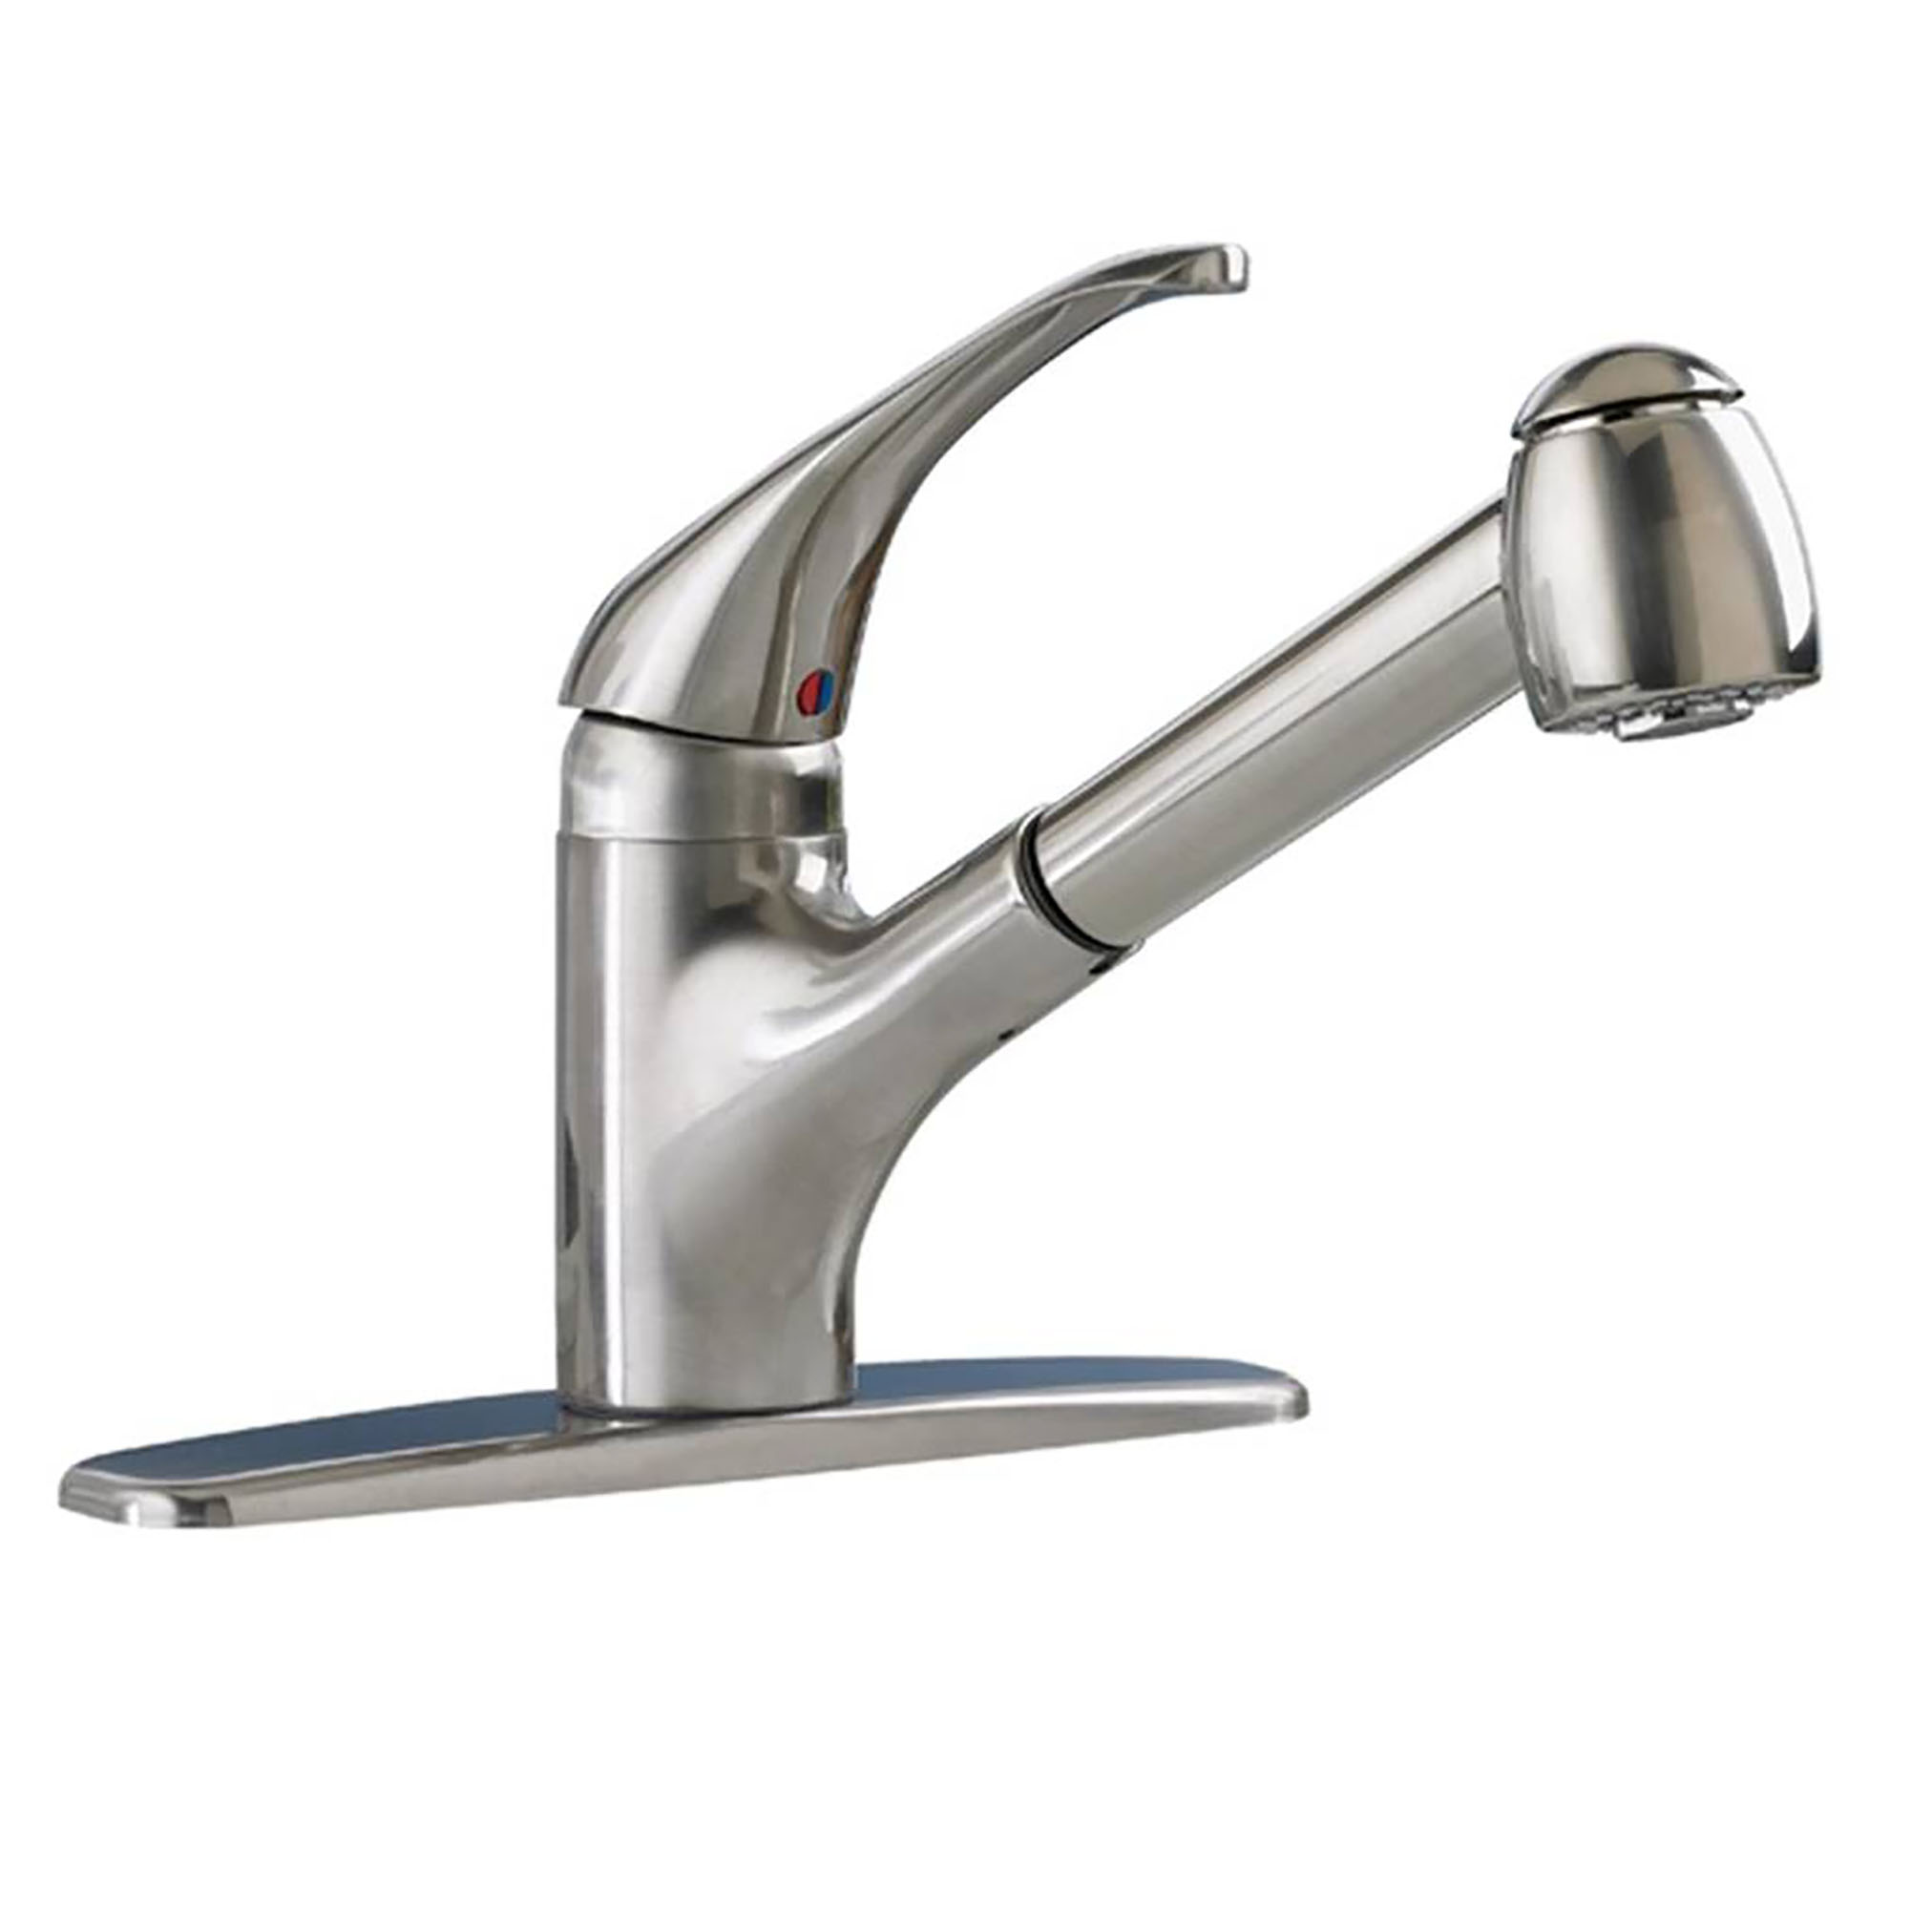 Reliant+® Single-Handle Pull-Out Dual-Spray Kitchen Faucet 2.2 gpm/8.3 L/min